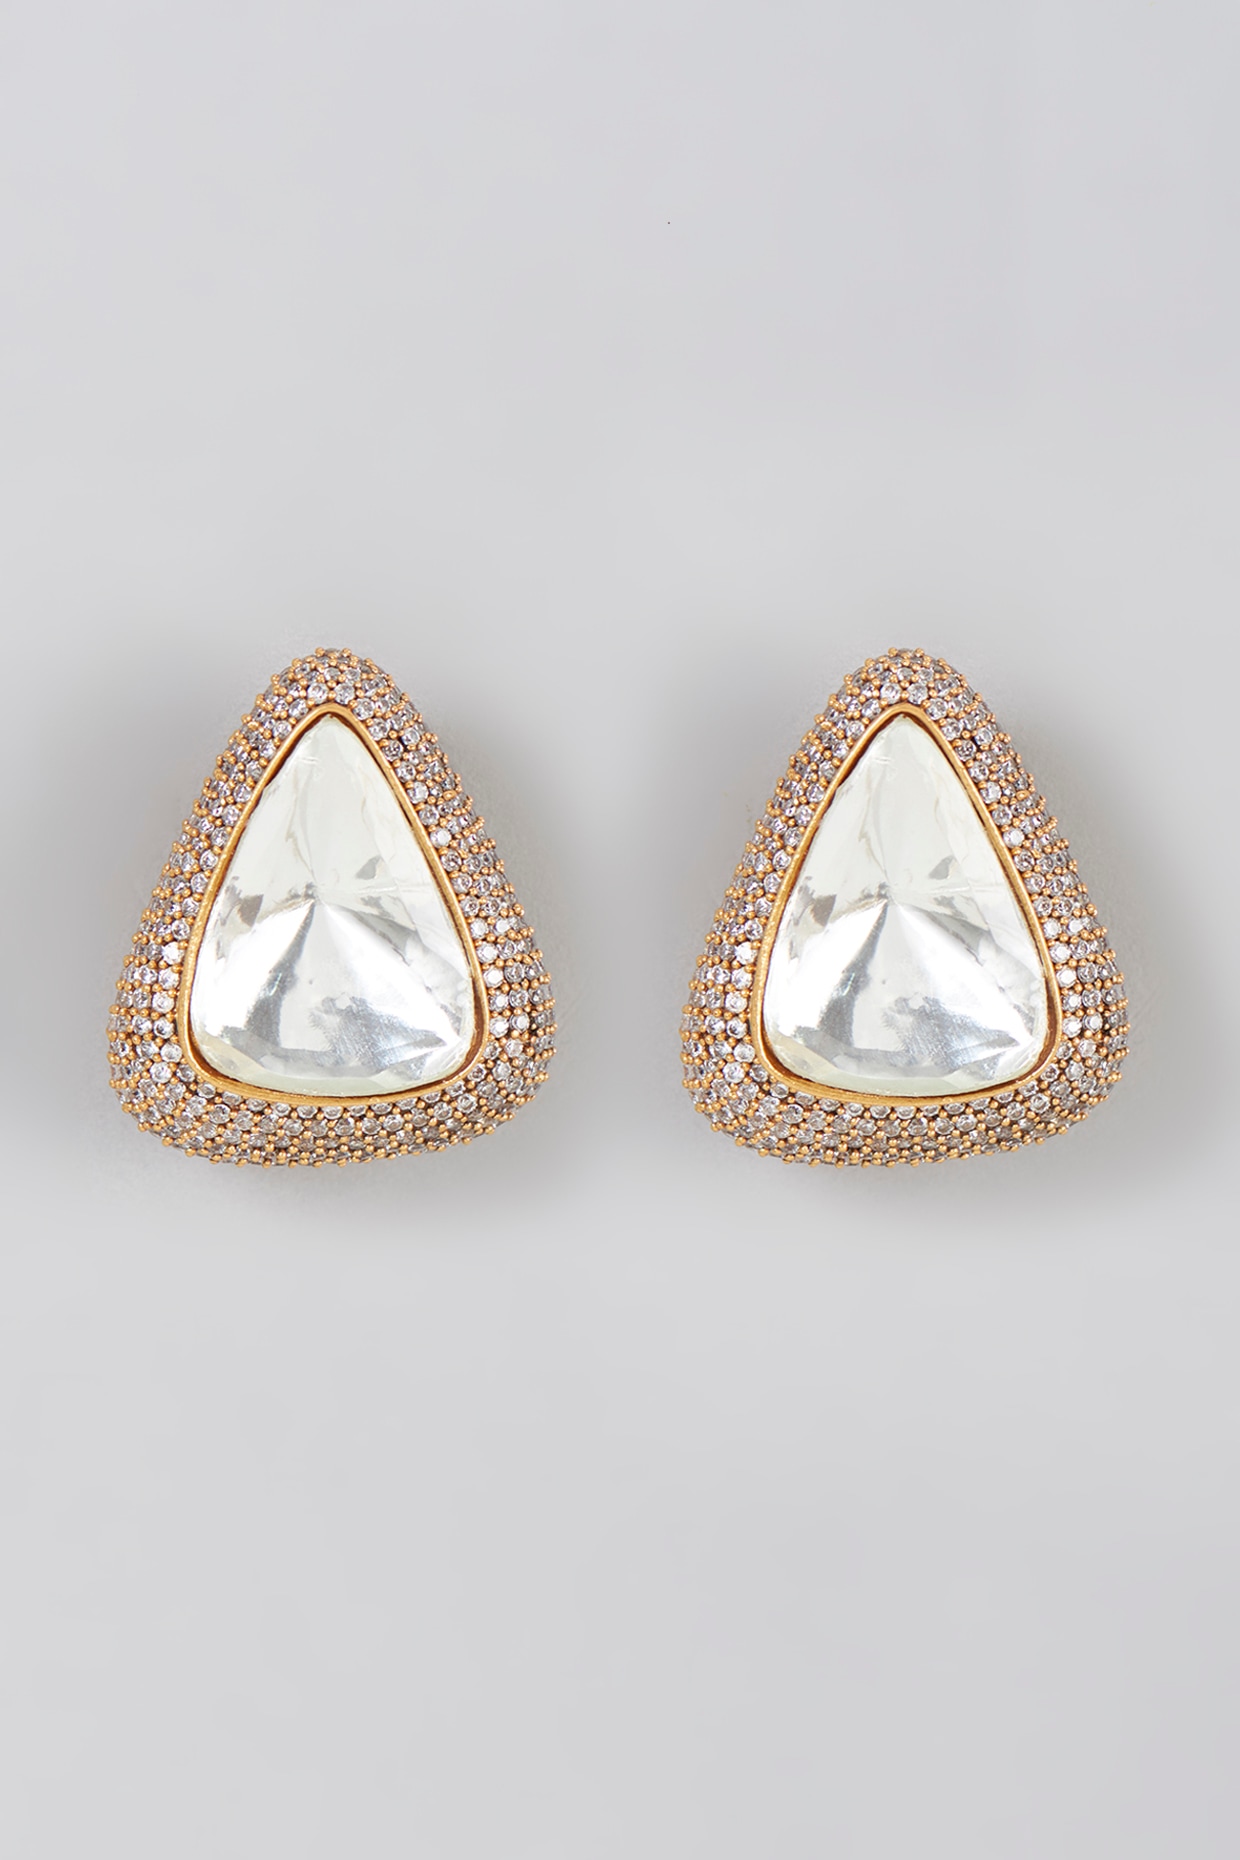 White Finish Faux Diamond & Champagne Synthetic Stone Stud Earrings Design  by Aster at Pernia's Pop Up Shop 2024